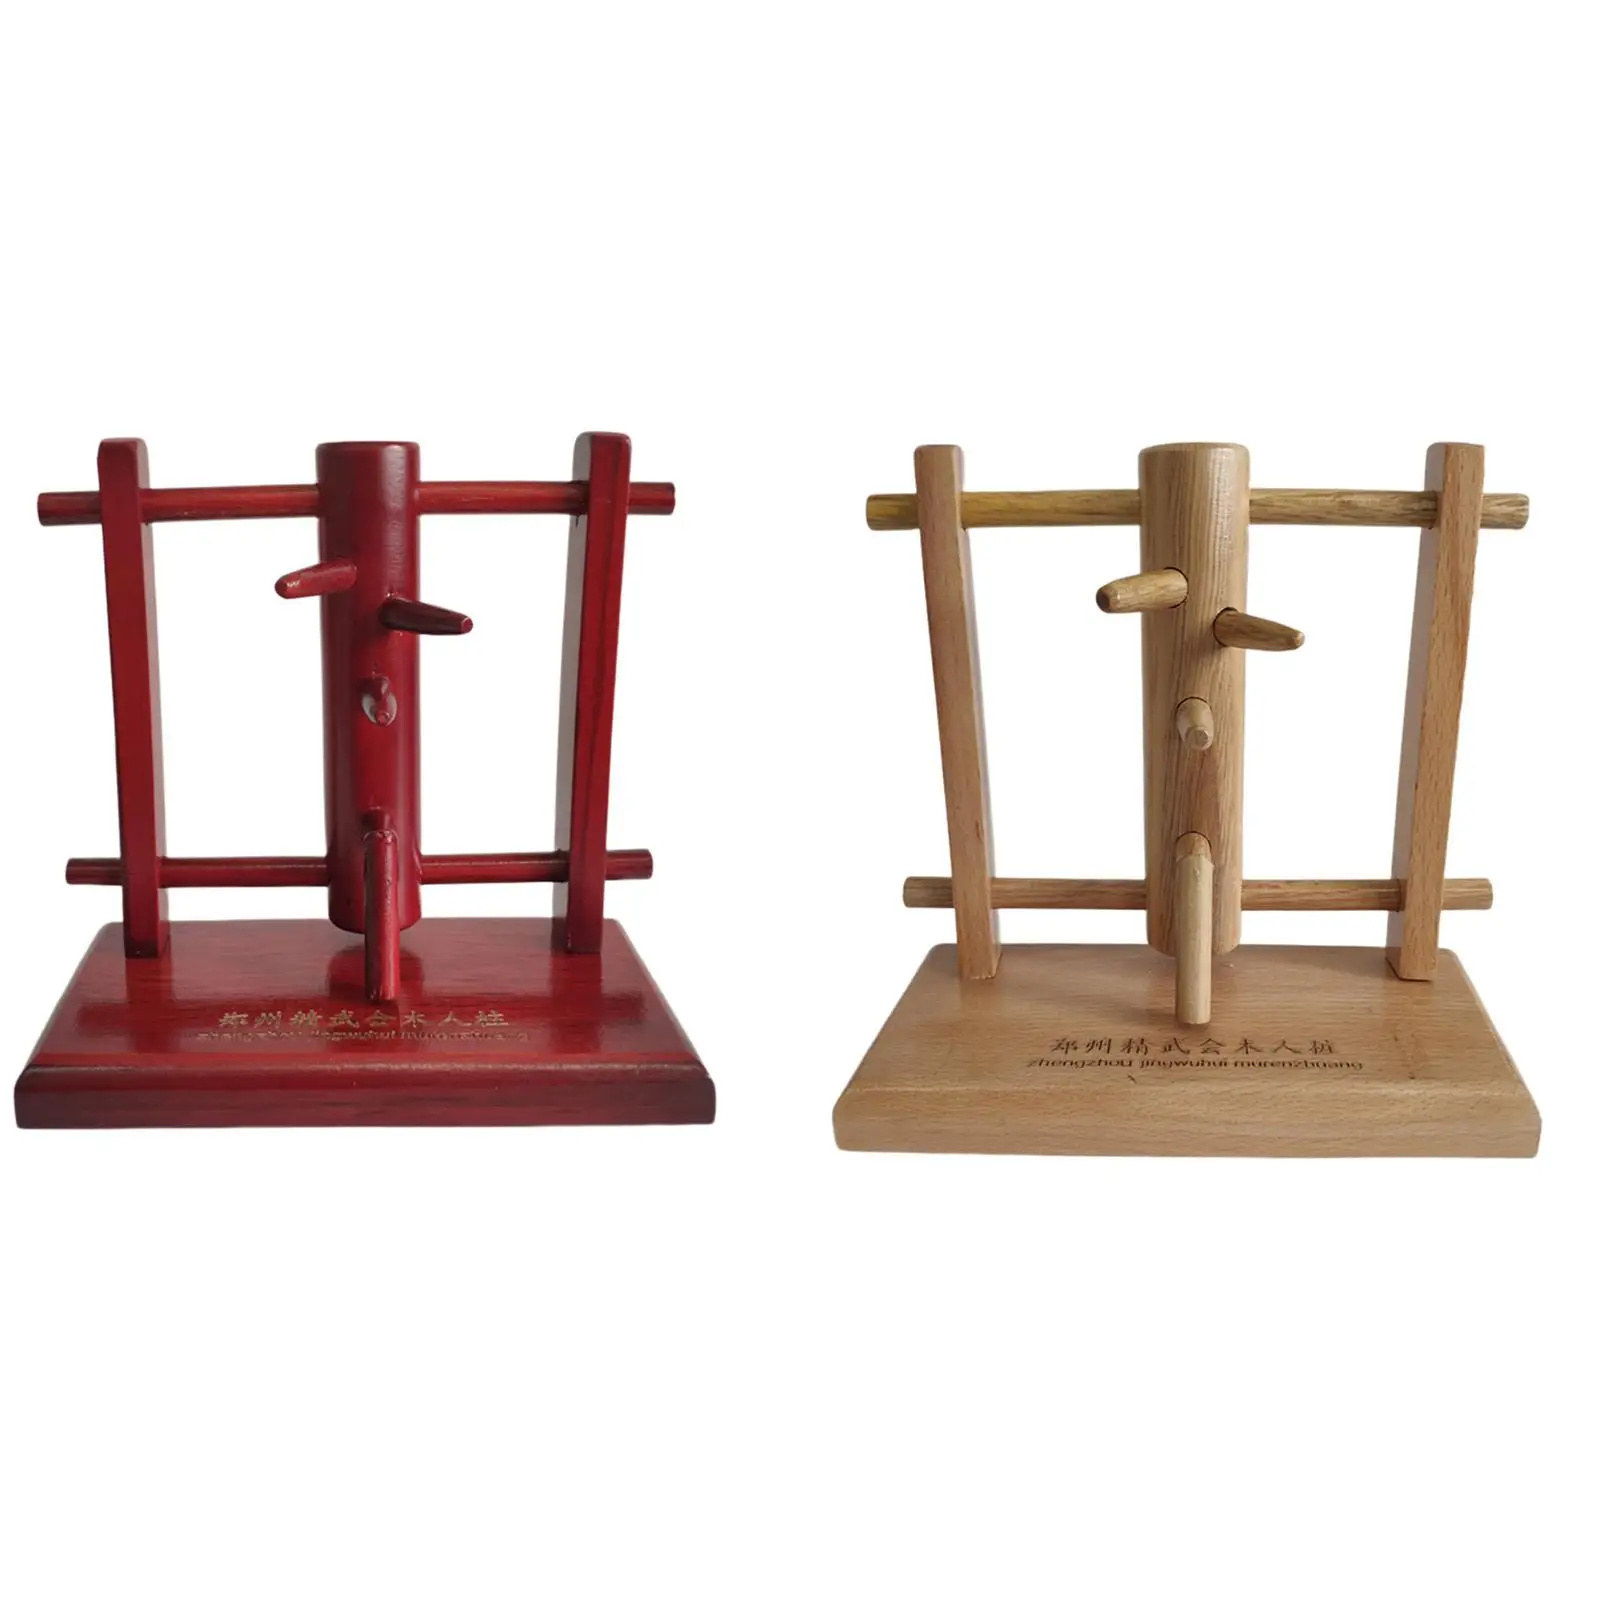 Wooden  Model Decor Wing Chun Sculpture Hanging Ornament Collectible Collection Statue for Martial Arts School Table Home